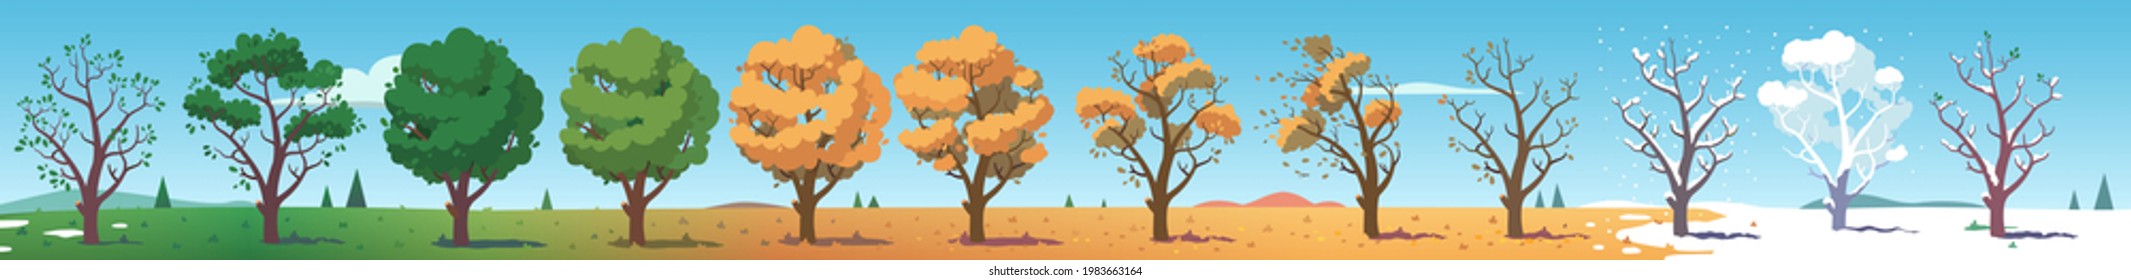 All four seasons tree plant cycle landscape set. Green, yellow foliage leaves crown, bare snow covered branches. Summer, autumn, winter and spring weather flat vector nature illustration design asset